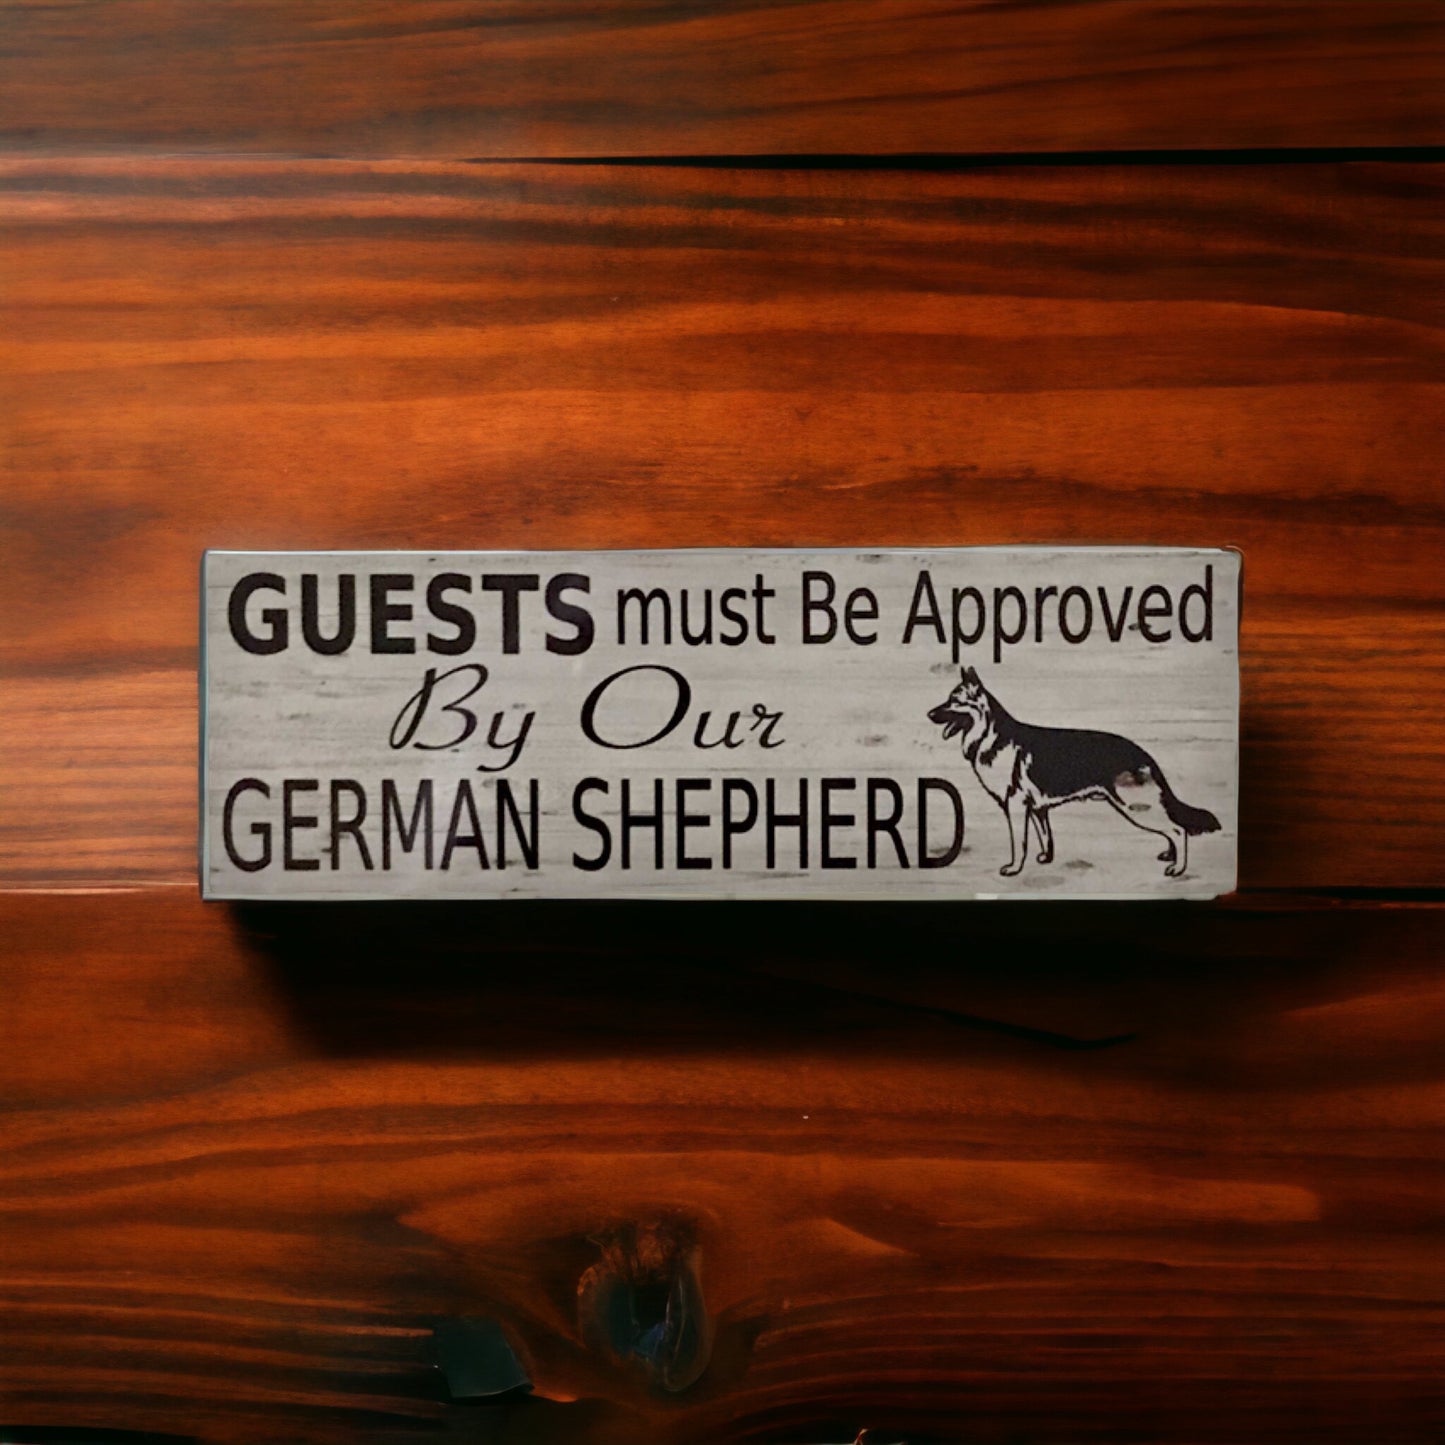 German Shepherd Dog Guests Must Be Approved By Our Sign - The Renmy Store Homewares & Gifts 